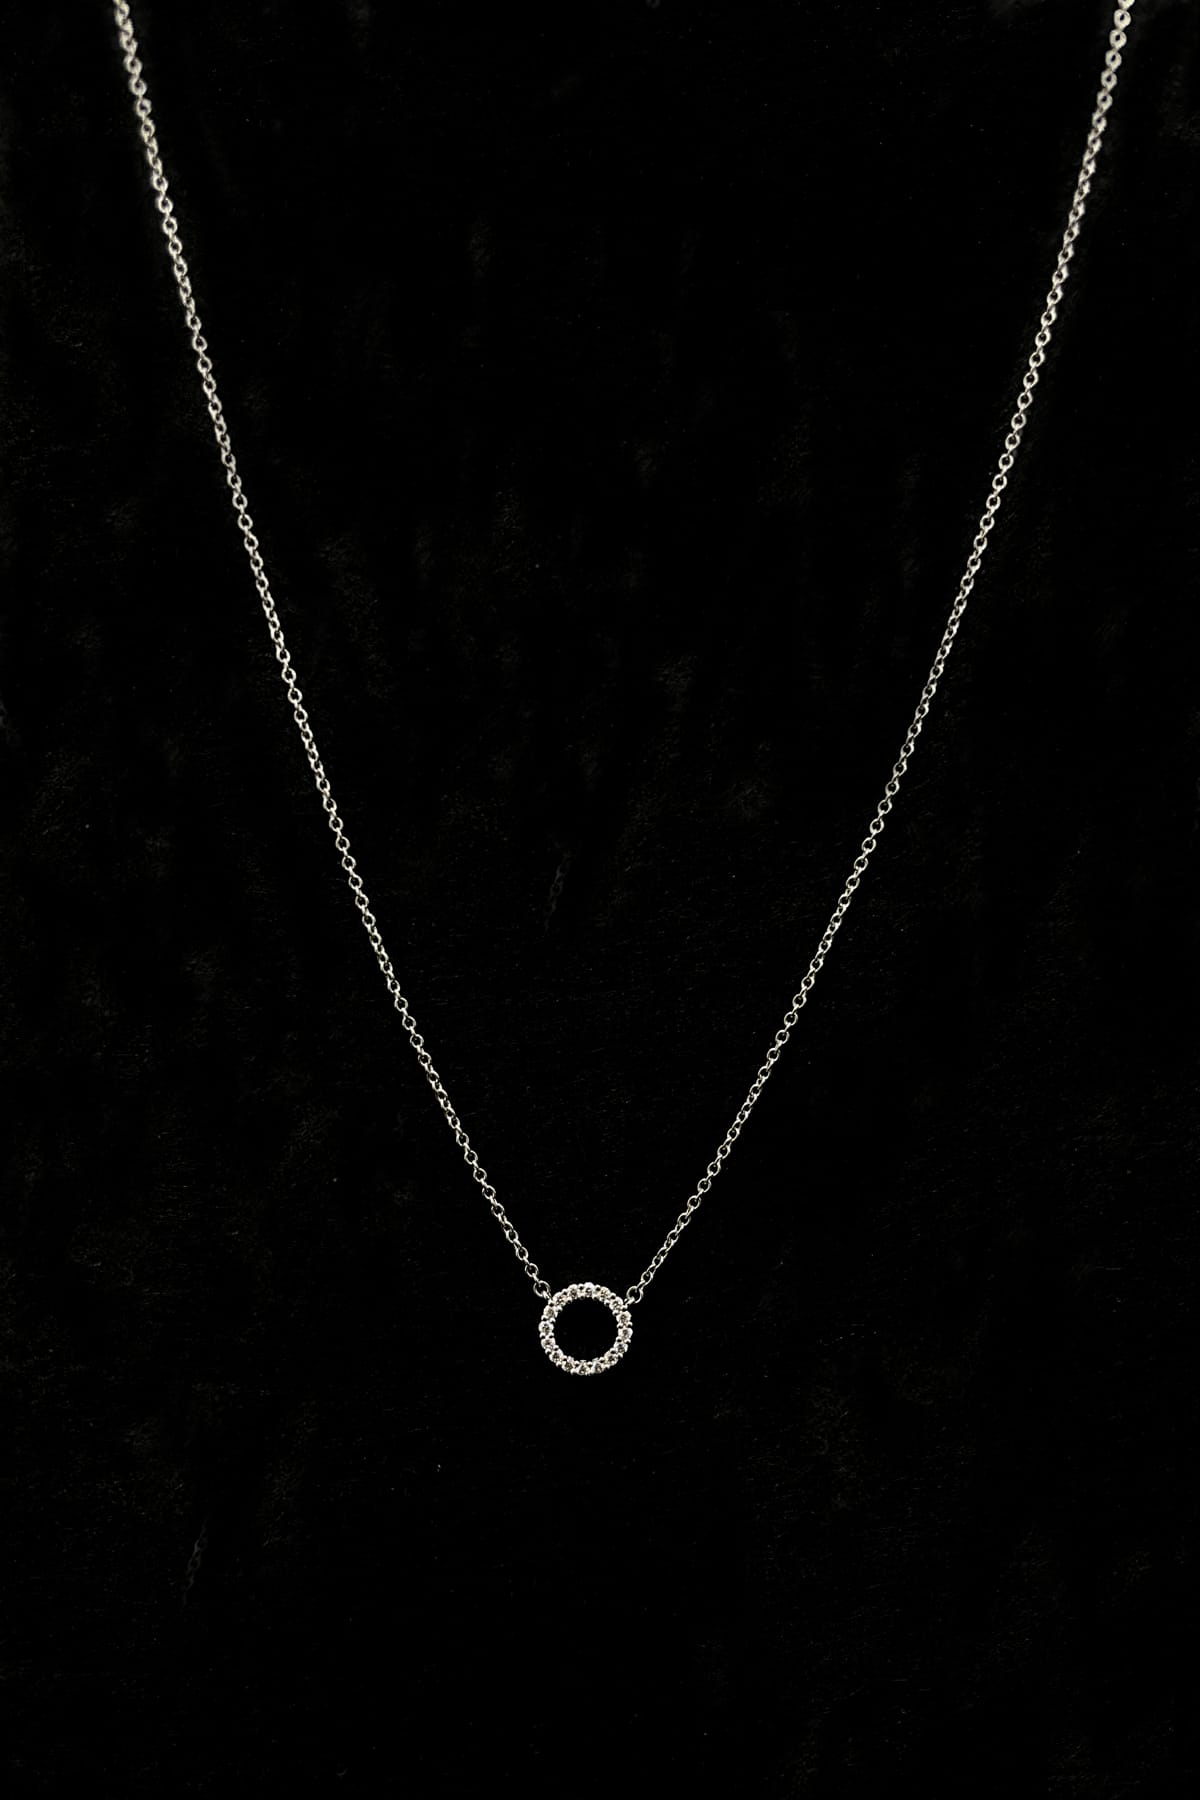 18 Carat White Gold Signature Circle Pendant From Hearts On Fire available at LeGassick Diamonds and Jewellery Gold Coast, Australia.